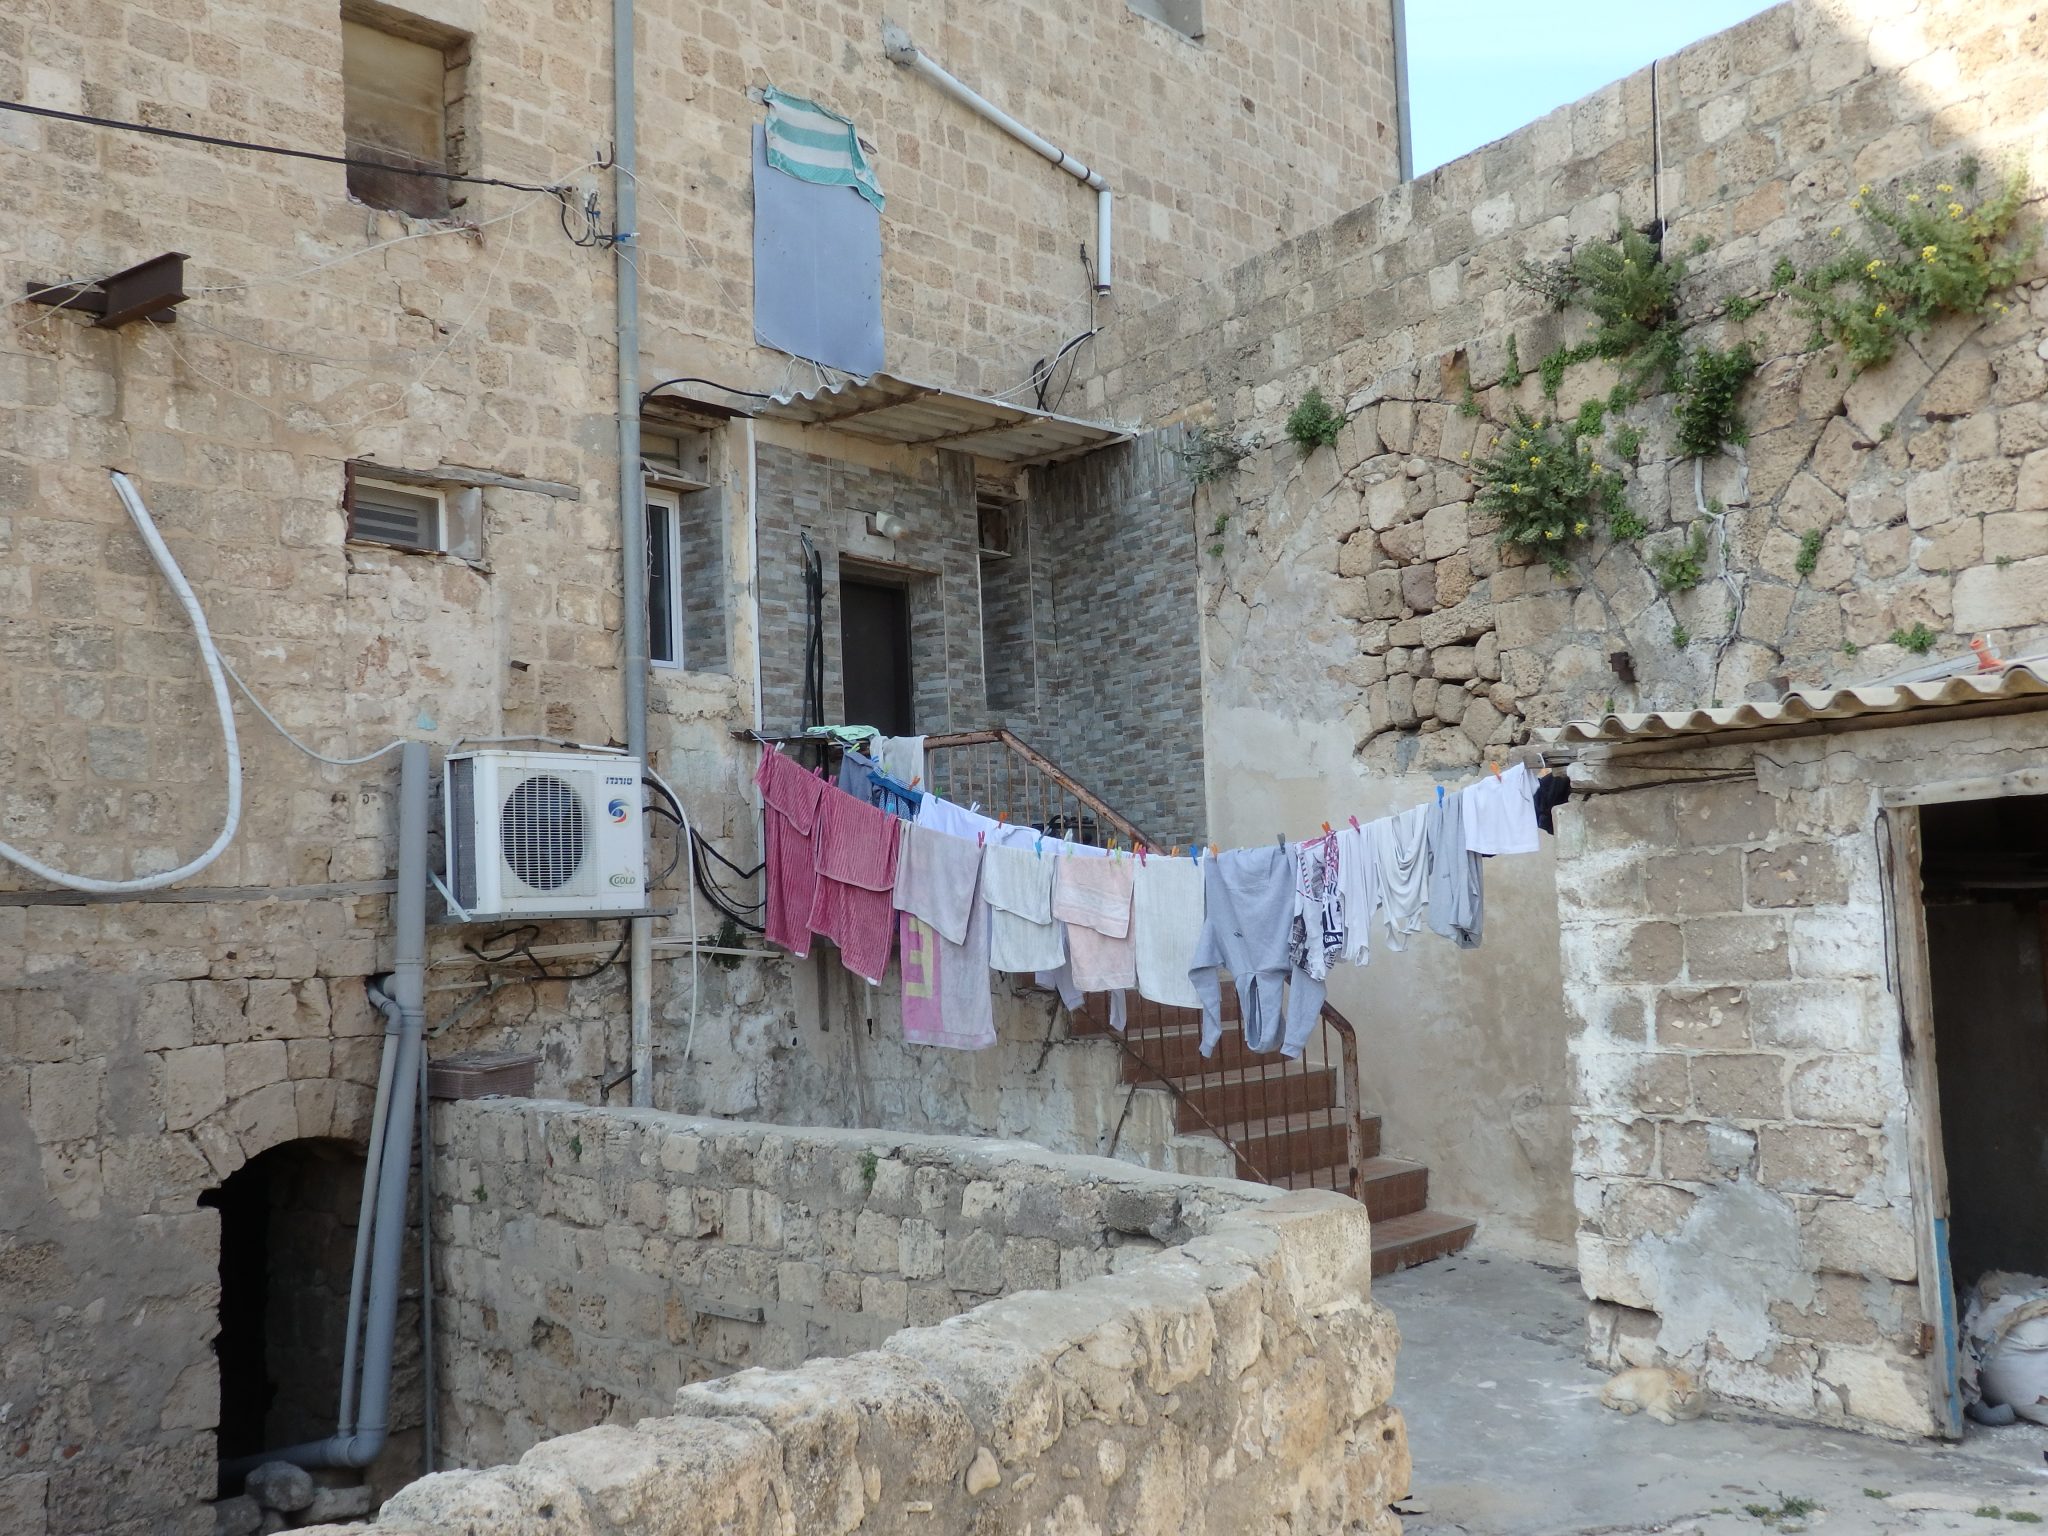 I love how the entrance to this home in Akko old city shows signs of its age: the air conditioner and the modern siding around the door contrasting with the ancient arches, still visible on the wall.